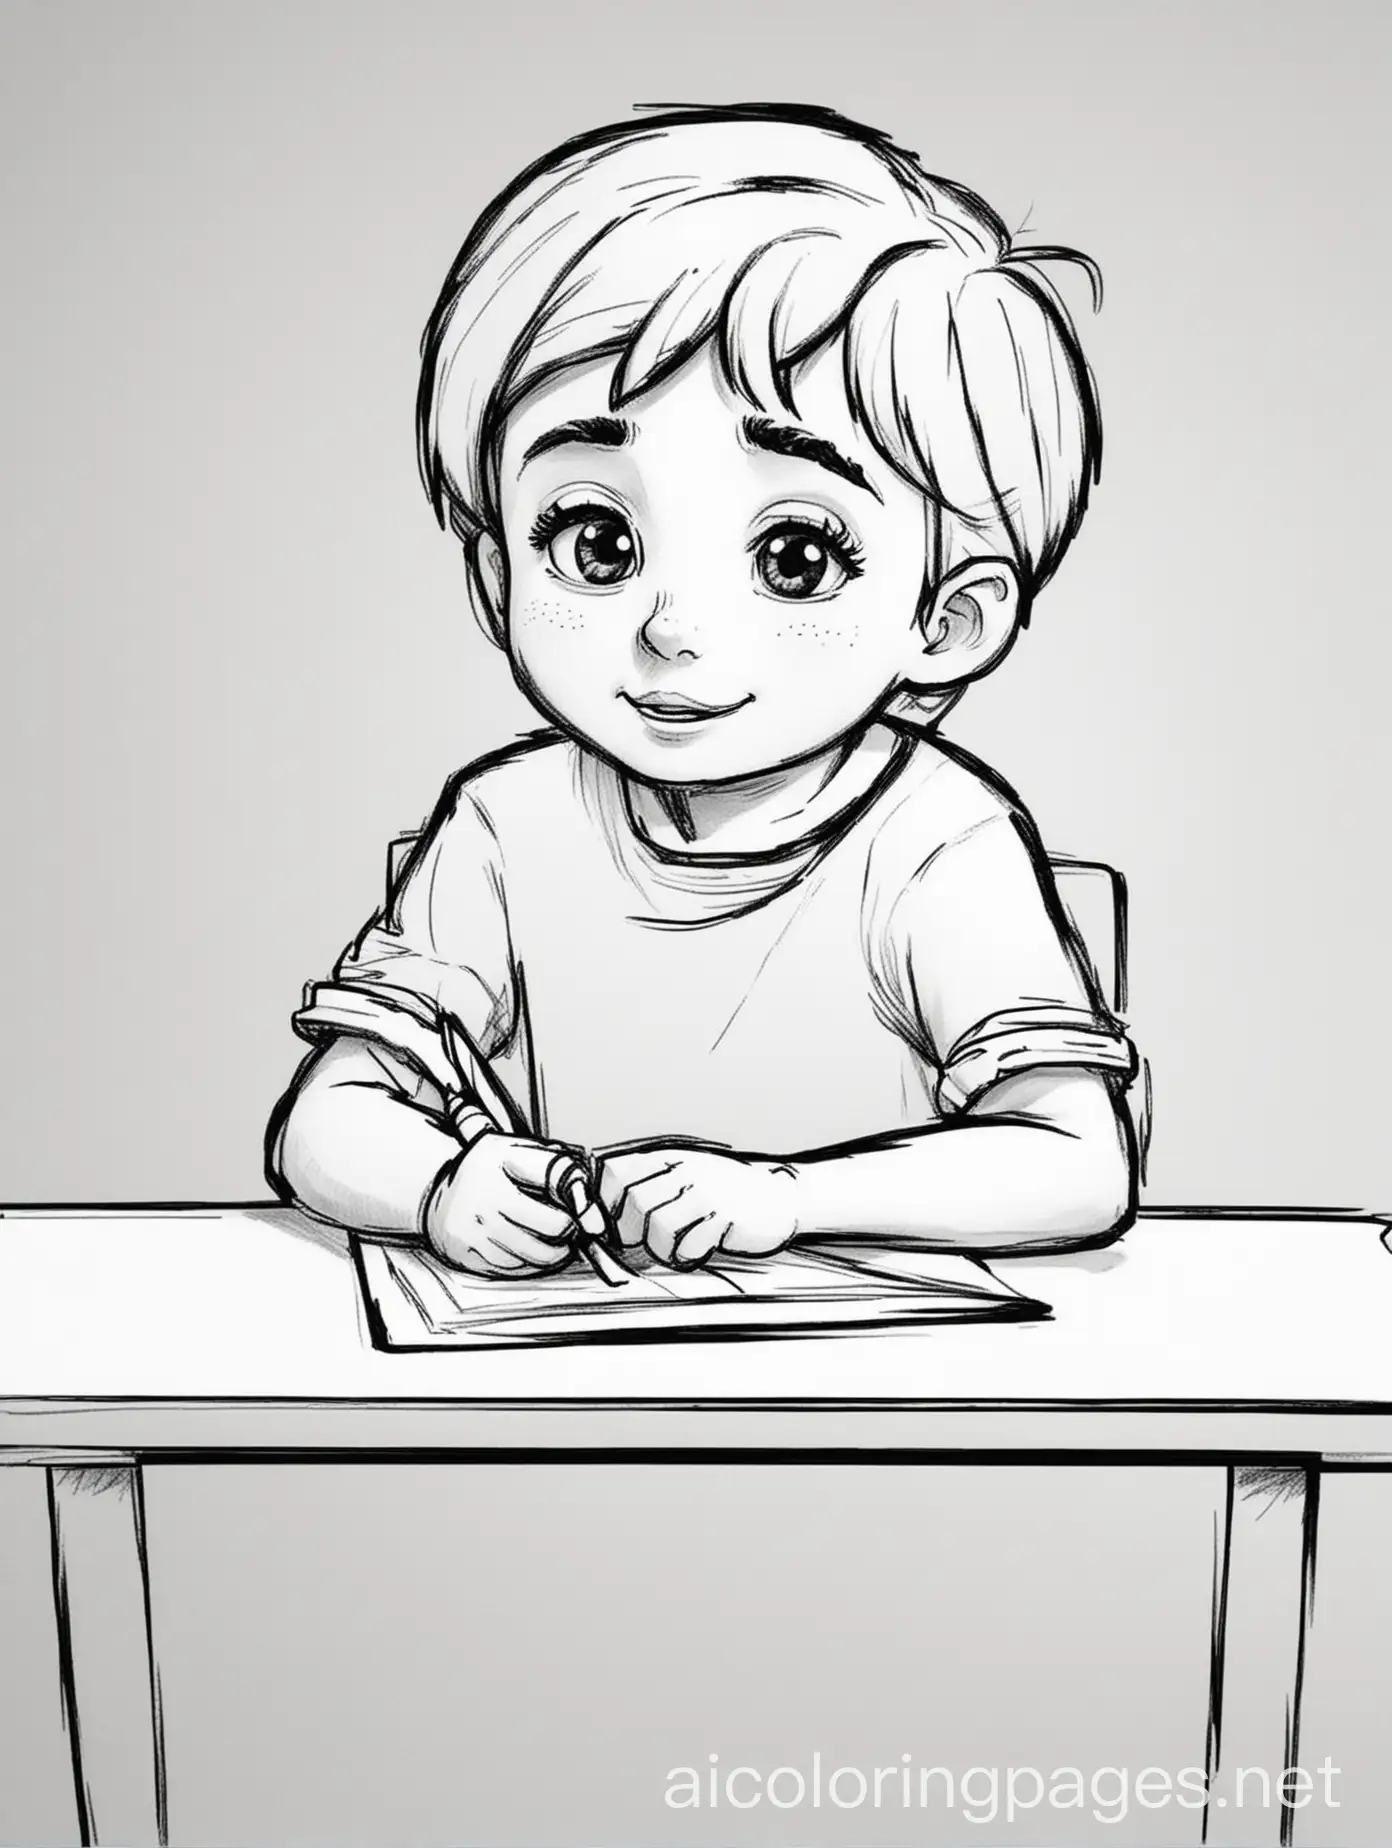 Young cartoon Boy sitting behind his desk Coloring , black and white, line art, white background, Simplicity, Ample White Space. The background of the coloring page is plain white to make it easy for young children to color within the lines. The outlines of all the subjects are easy to distinguish, making it simple for kids to color without too much difficulty, Coloring Page, black and white, line art, white background, Simplicity, Ample White Space. The background of the coloring page is plain white to make it easy for young children to color within the lines. The outlines of all the subjects are easy to distinguish, making it simple for kids to color without too much difficulty, Coloring Page, black and white, line art, white background, Simplicity, Ample White Space. The background of the coloring page is plain white to make it easy for young children to color within the lines. The outlines of all the subjects are easy to distinguish, making it simple for kids to color without too much difficulty